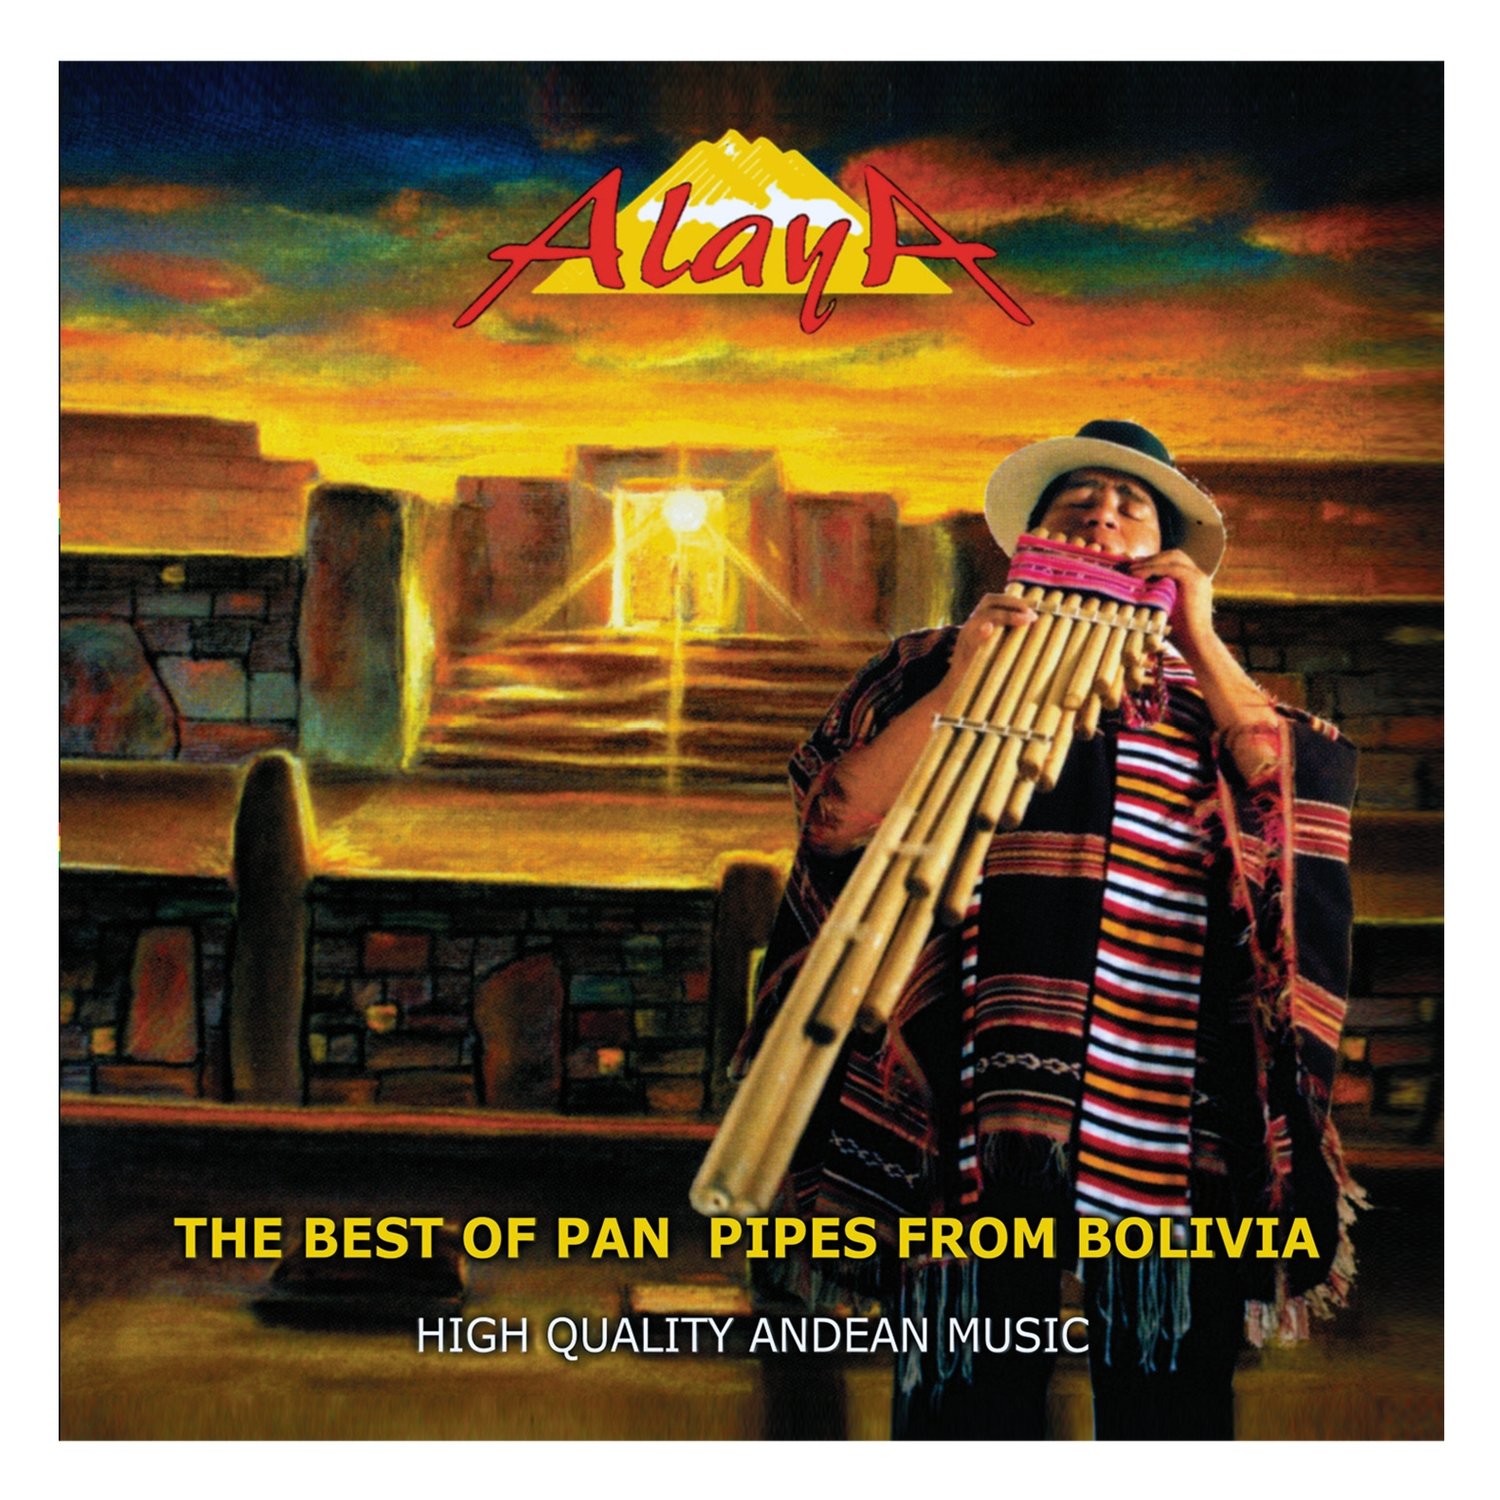 The Best of Pan Pipes from Bolivia